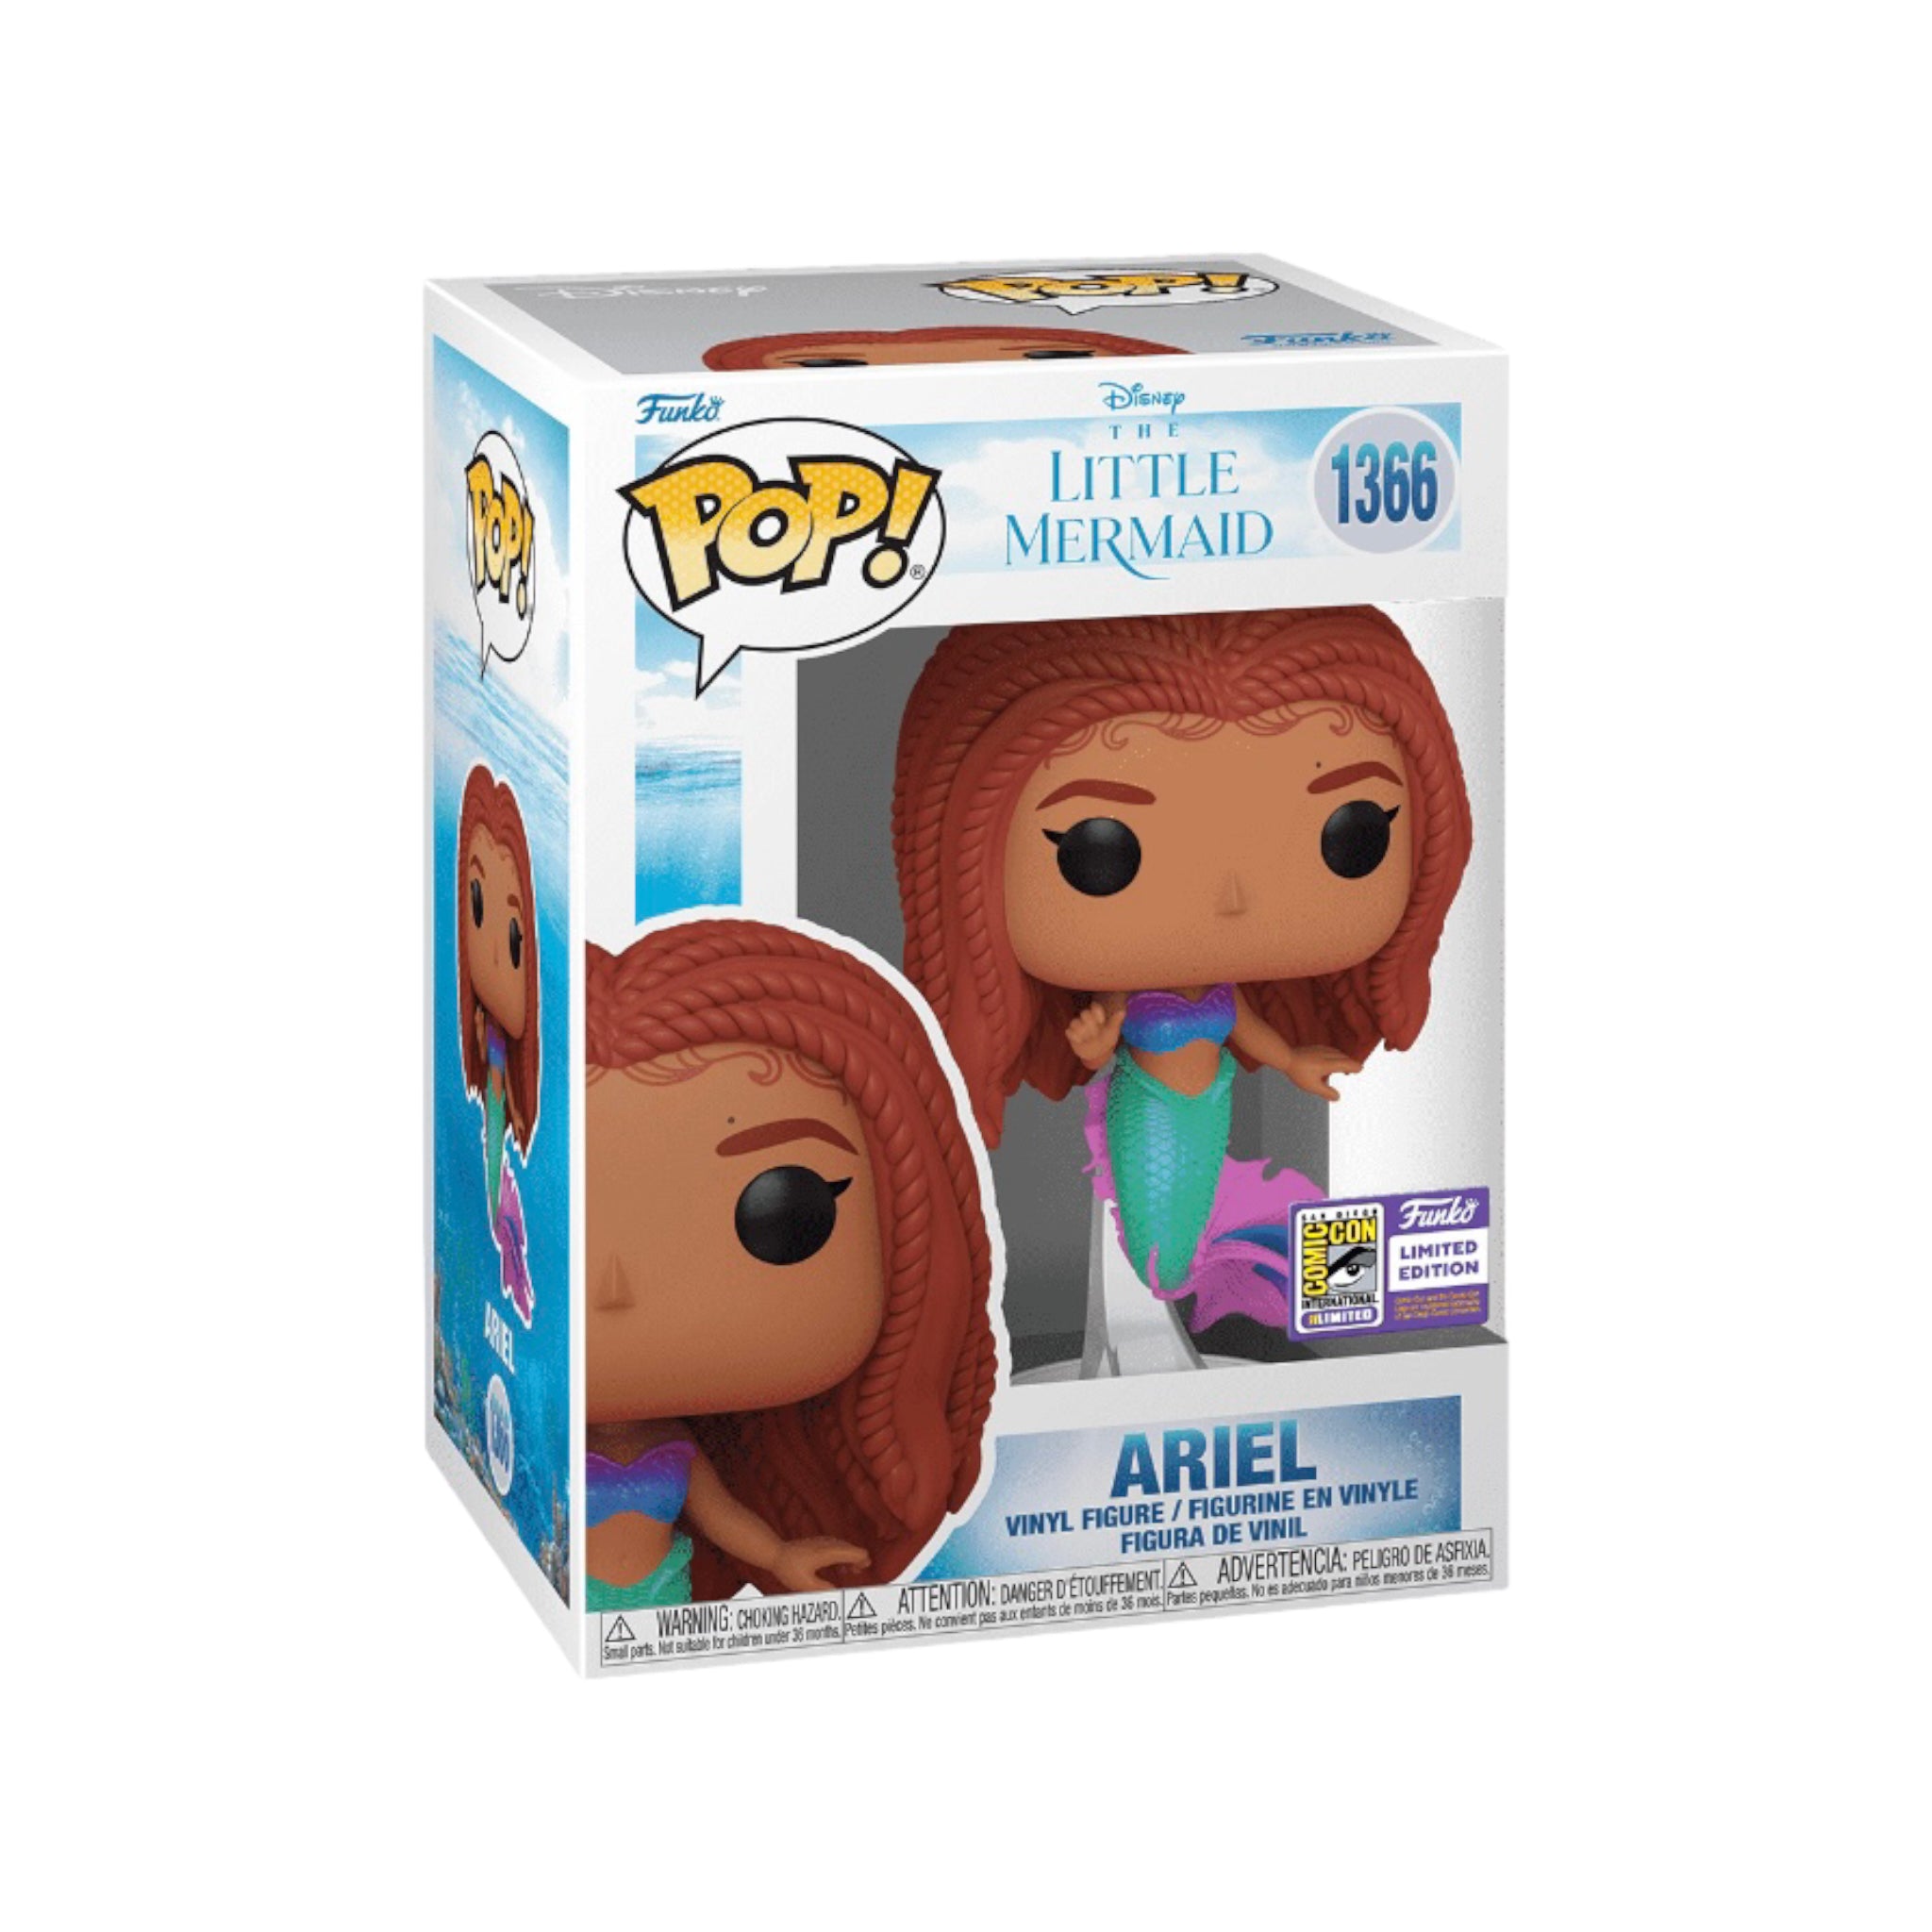 Ariel #1366 Funko Pop! - The Little Mermaid - SDCC 2023 Official Convention Exclusive